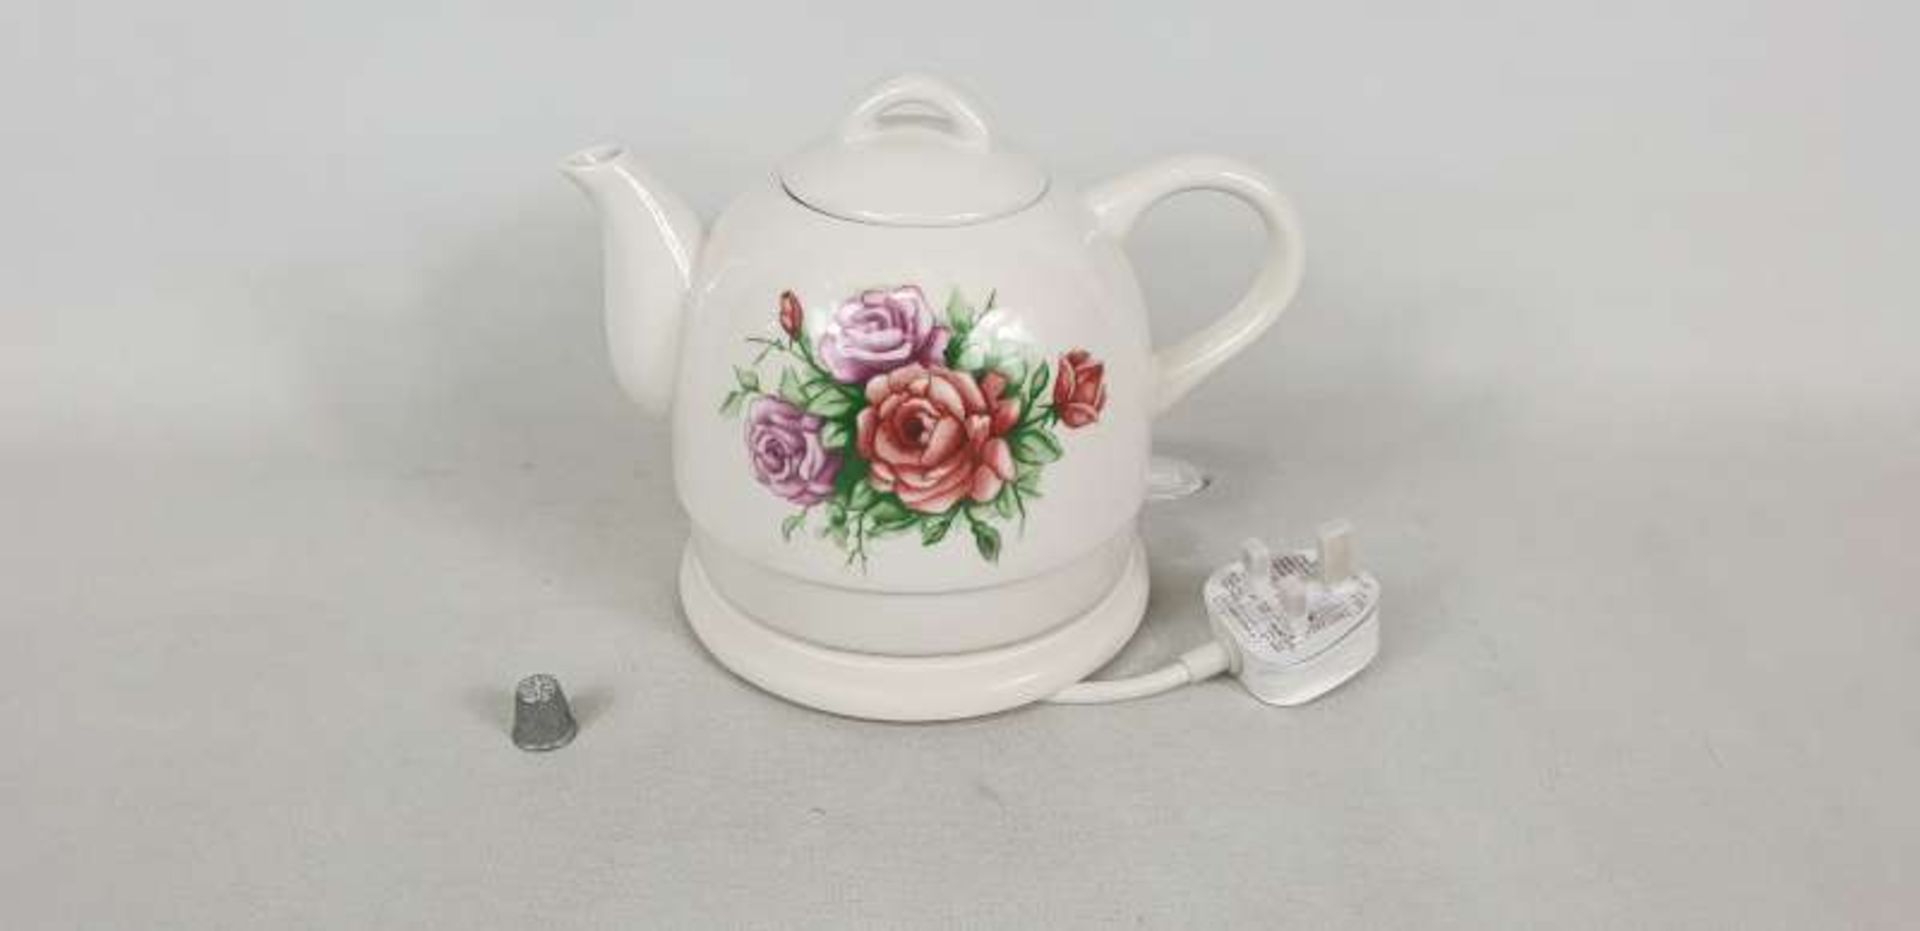 20 X BRAND NEW BOXED CERAMIC KETTLES WITH FLORAL DETAIL IN 5 BOXES